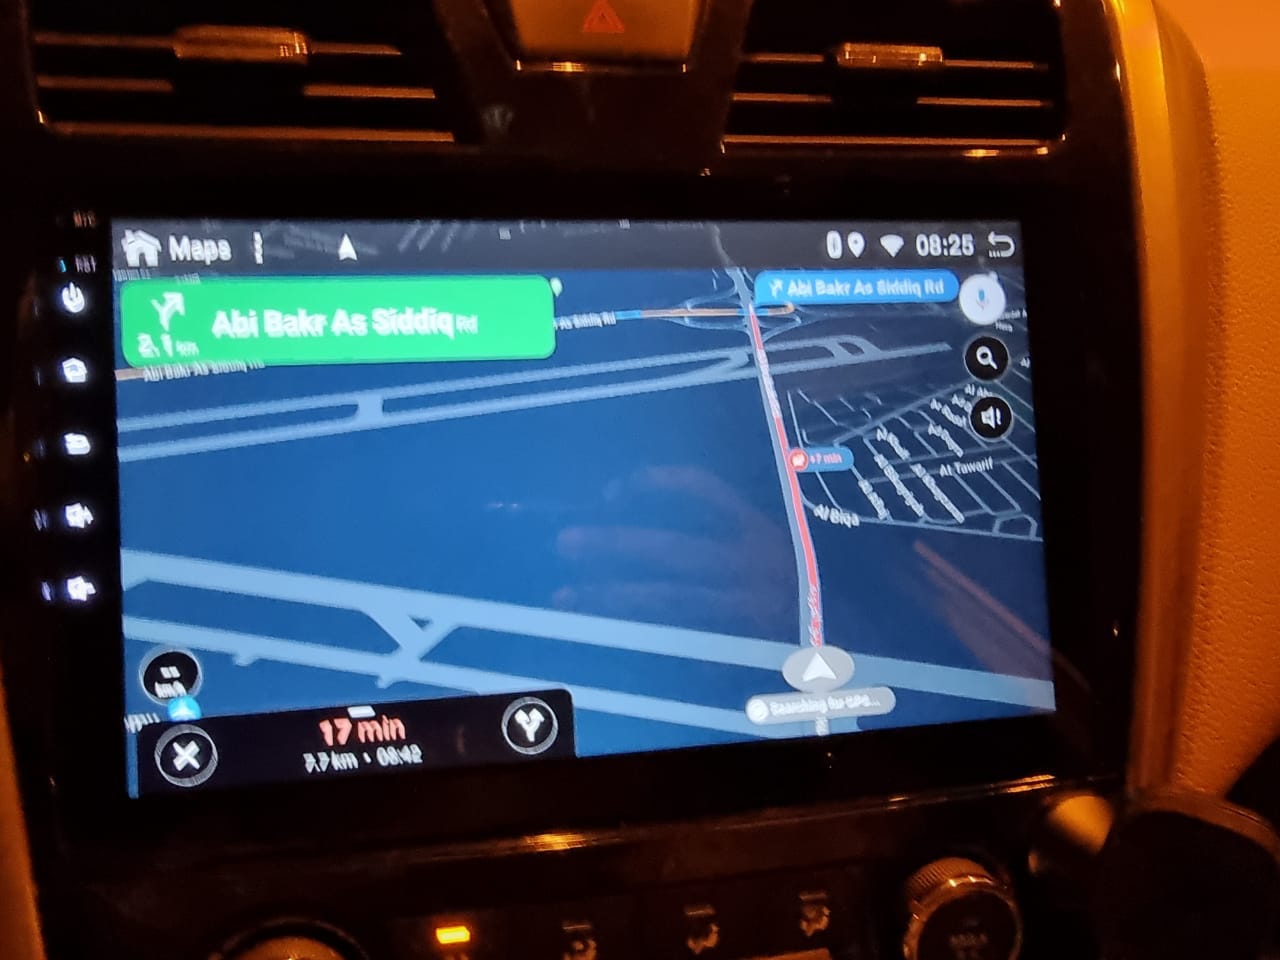 android car screen google maps display adjustments. - Android Auto Community